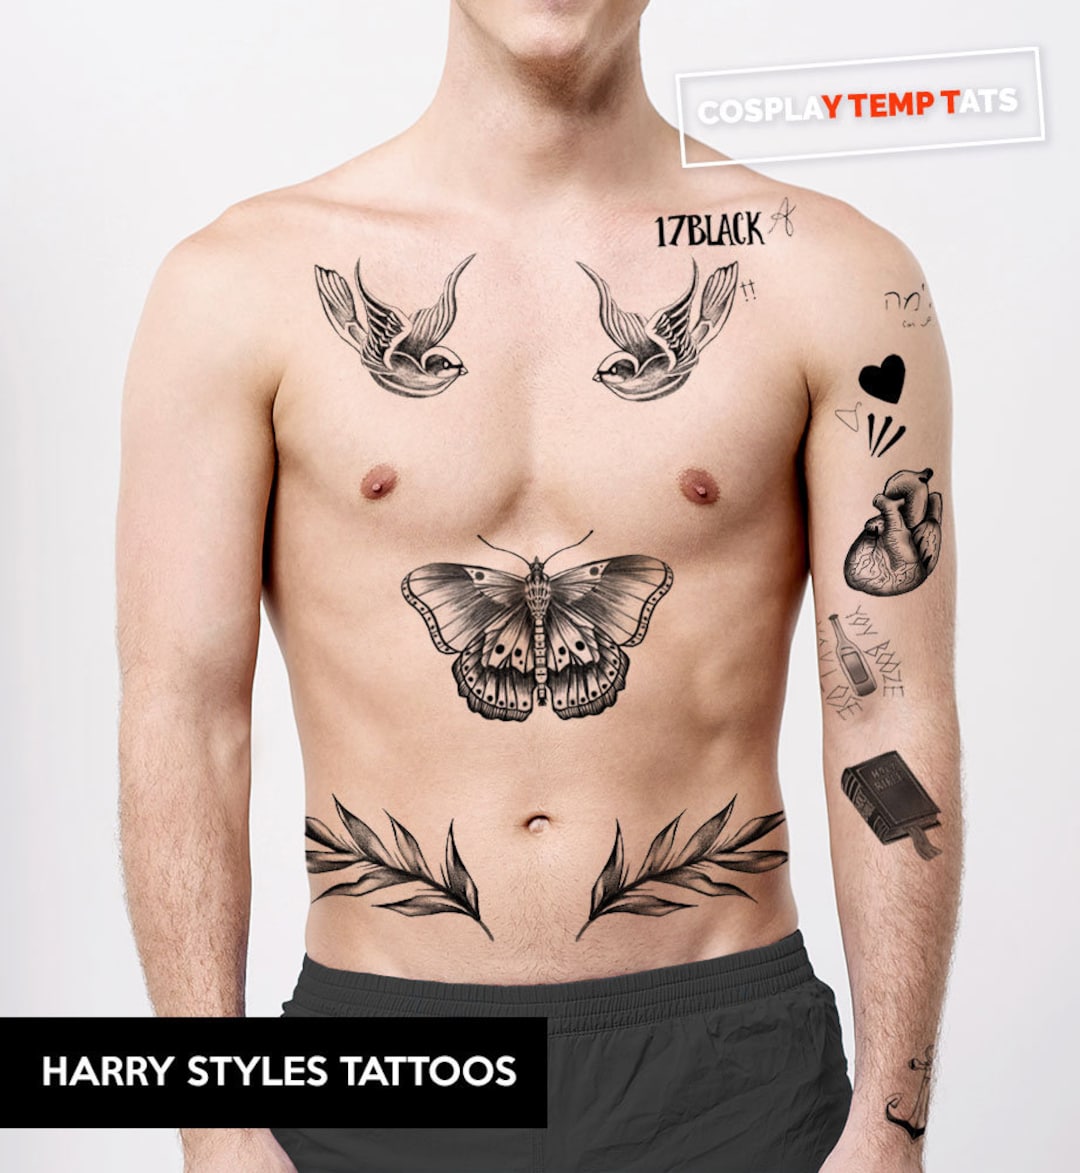 How many tattoos does Harry Styles have